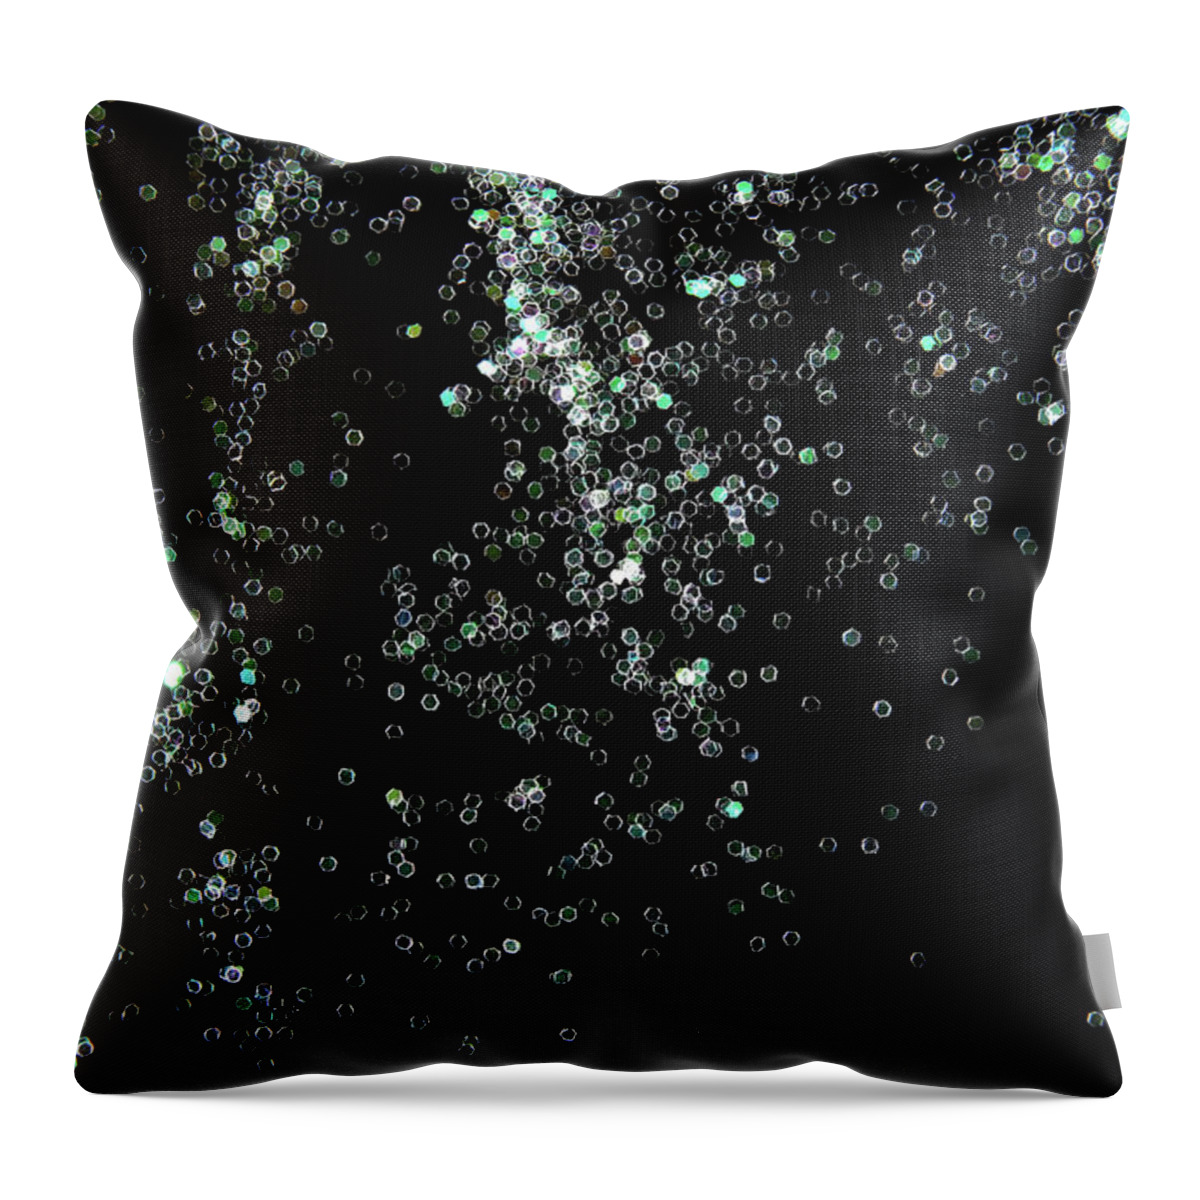 Background Throw Pillow featuring the photograph Glitter Sparkle On Black Background by Severija Kirilovaite